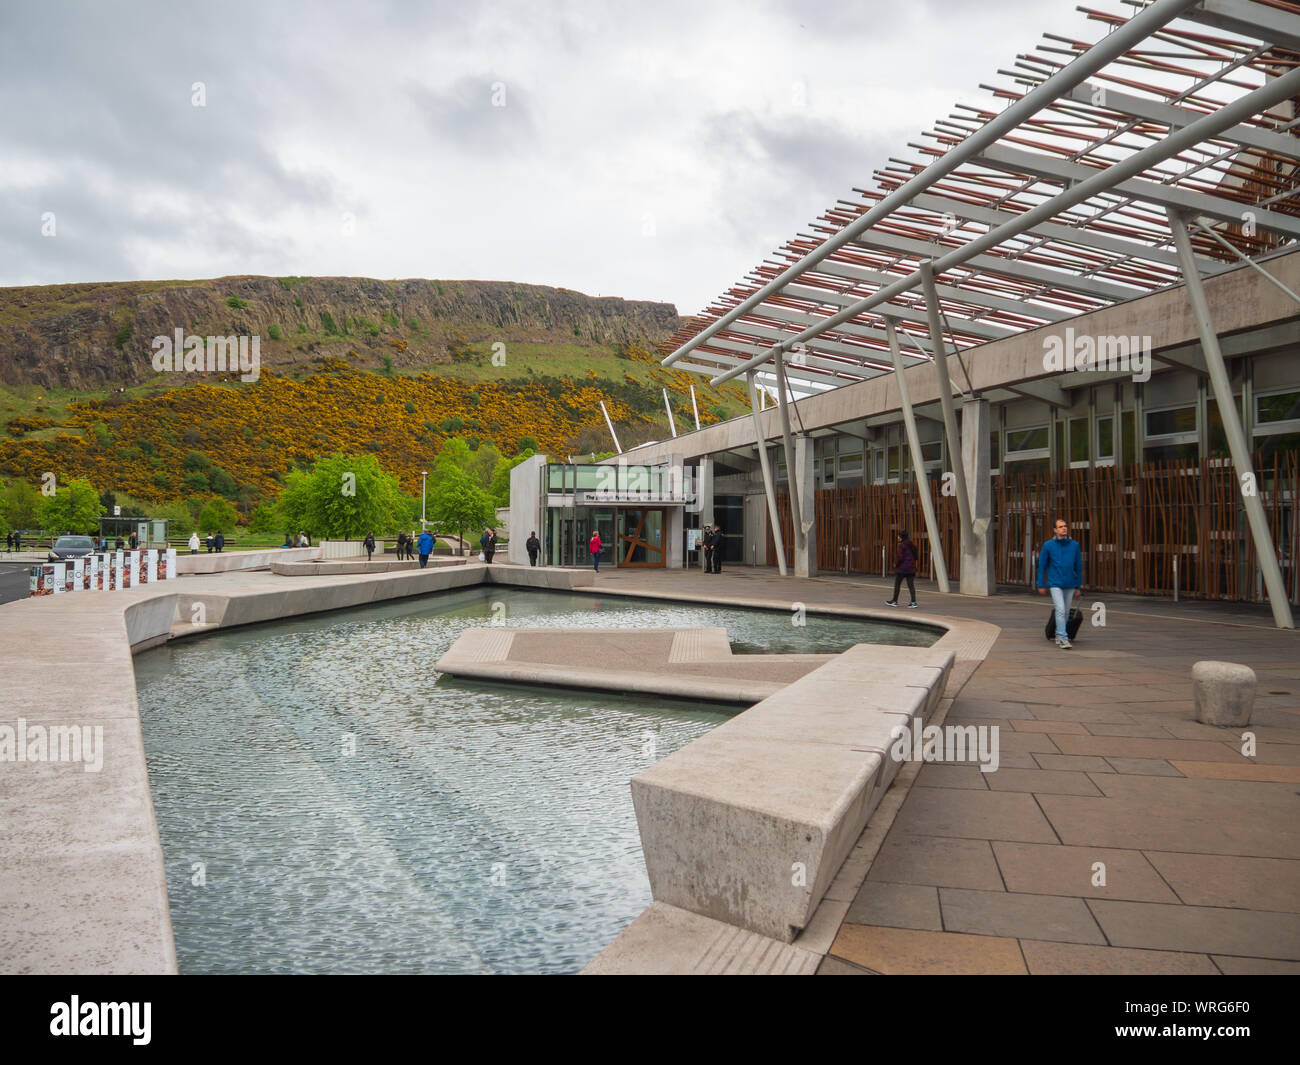 The new Scottish Parliament building in Holyrood, Edinburgh designed by the Spanish architect, Enric Miralles. Stock Photo